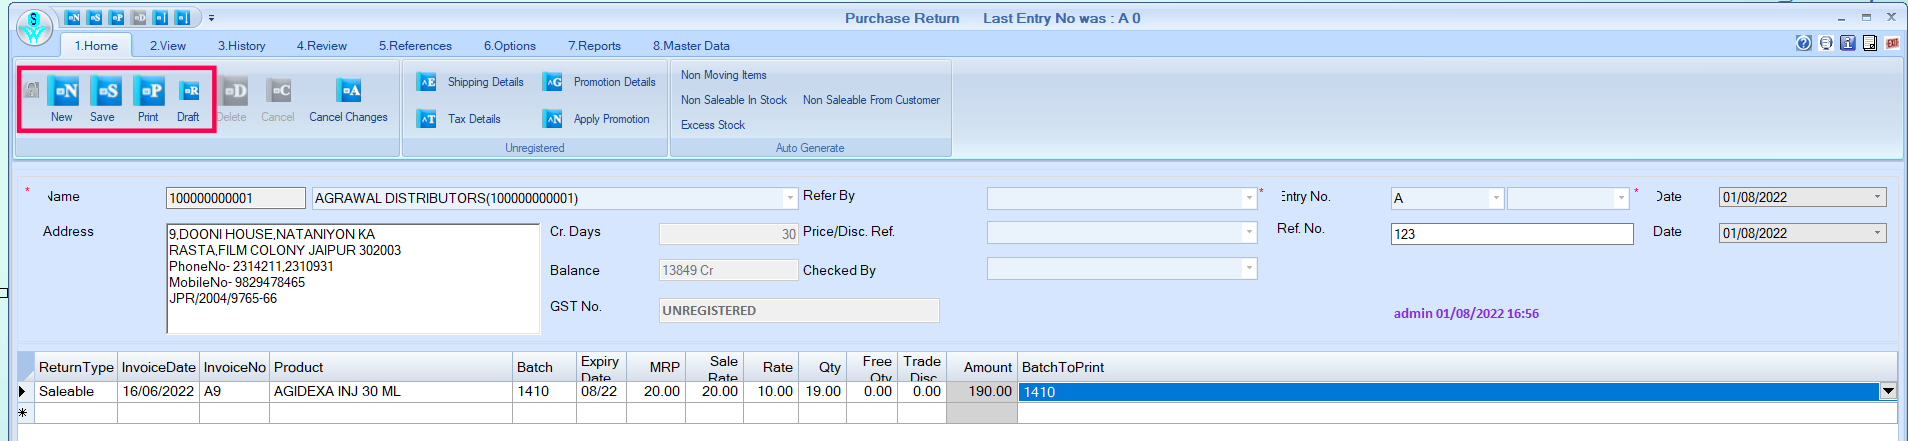 Purchase return process in retailgraph.